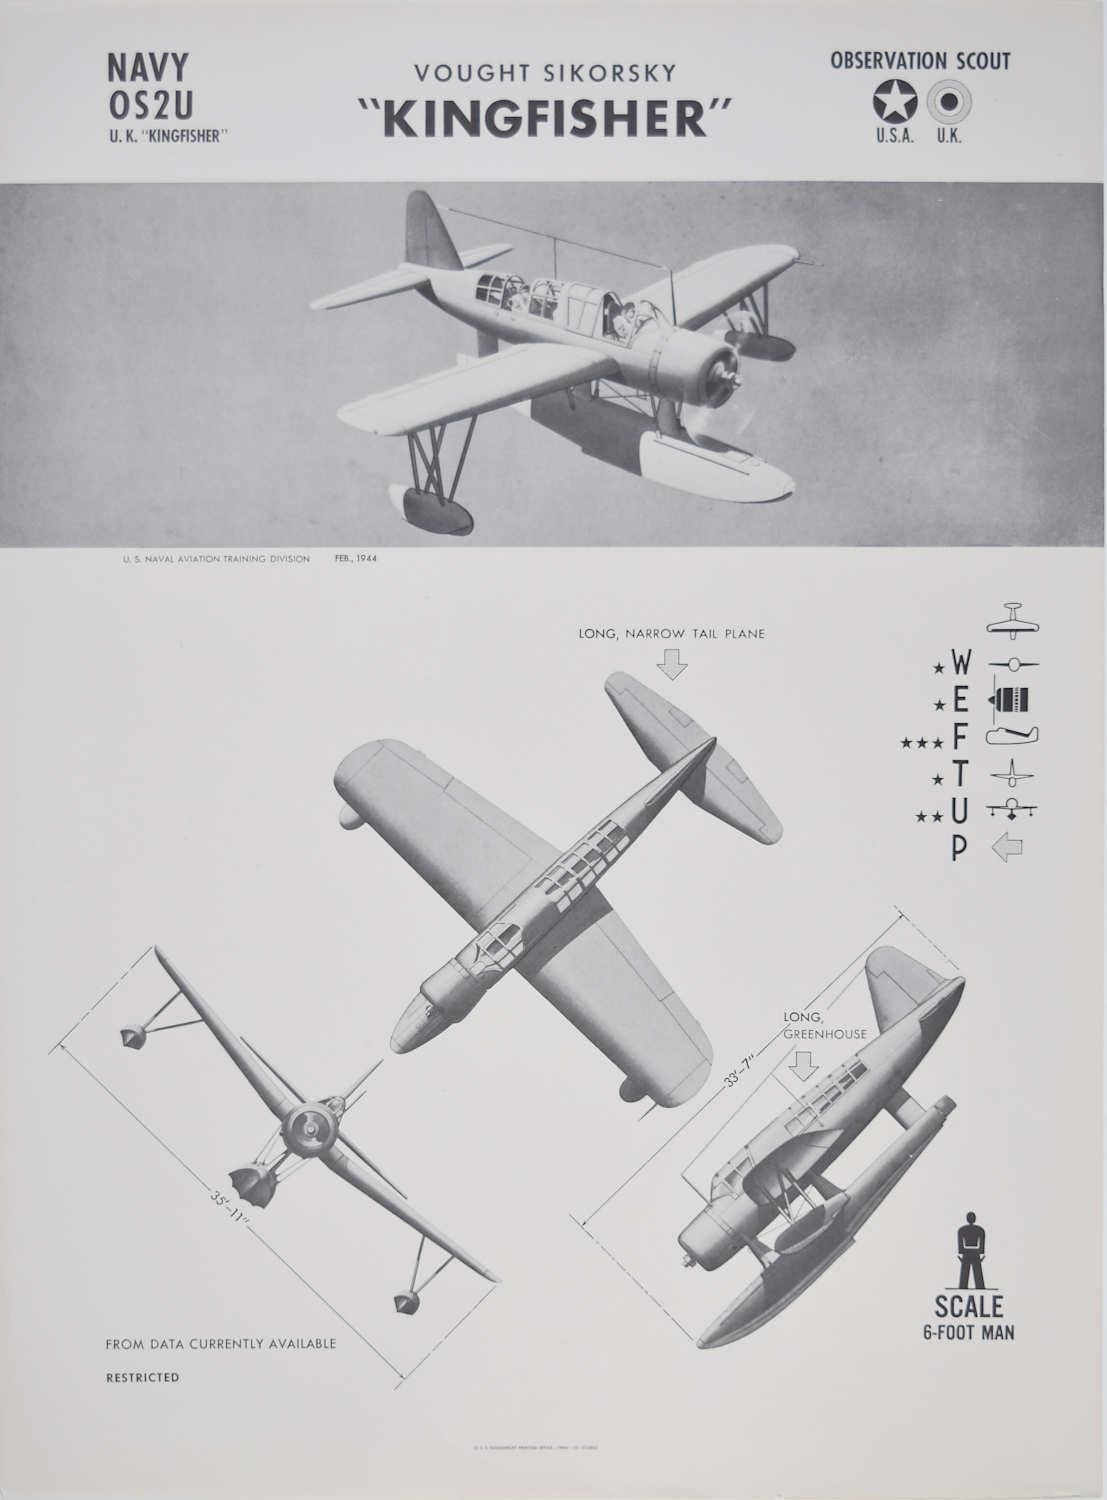 1942 Sikorsky "Kingfisher" observation scout plane identification poster WW2 - Print by Unknown